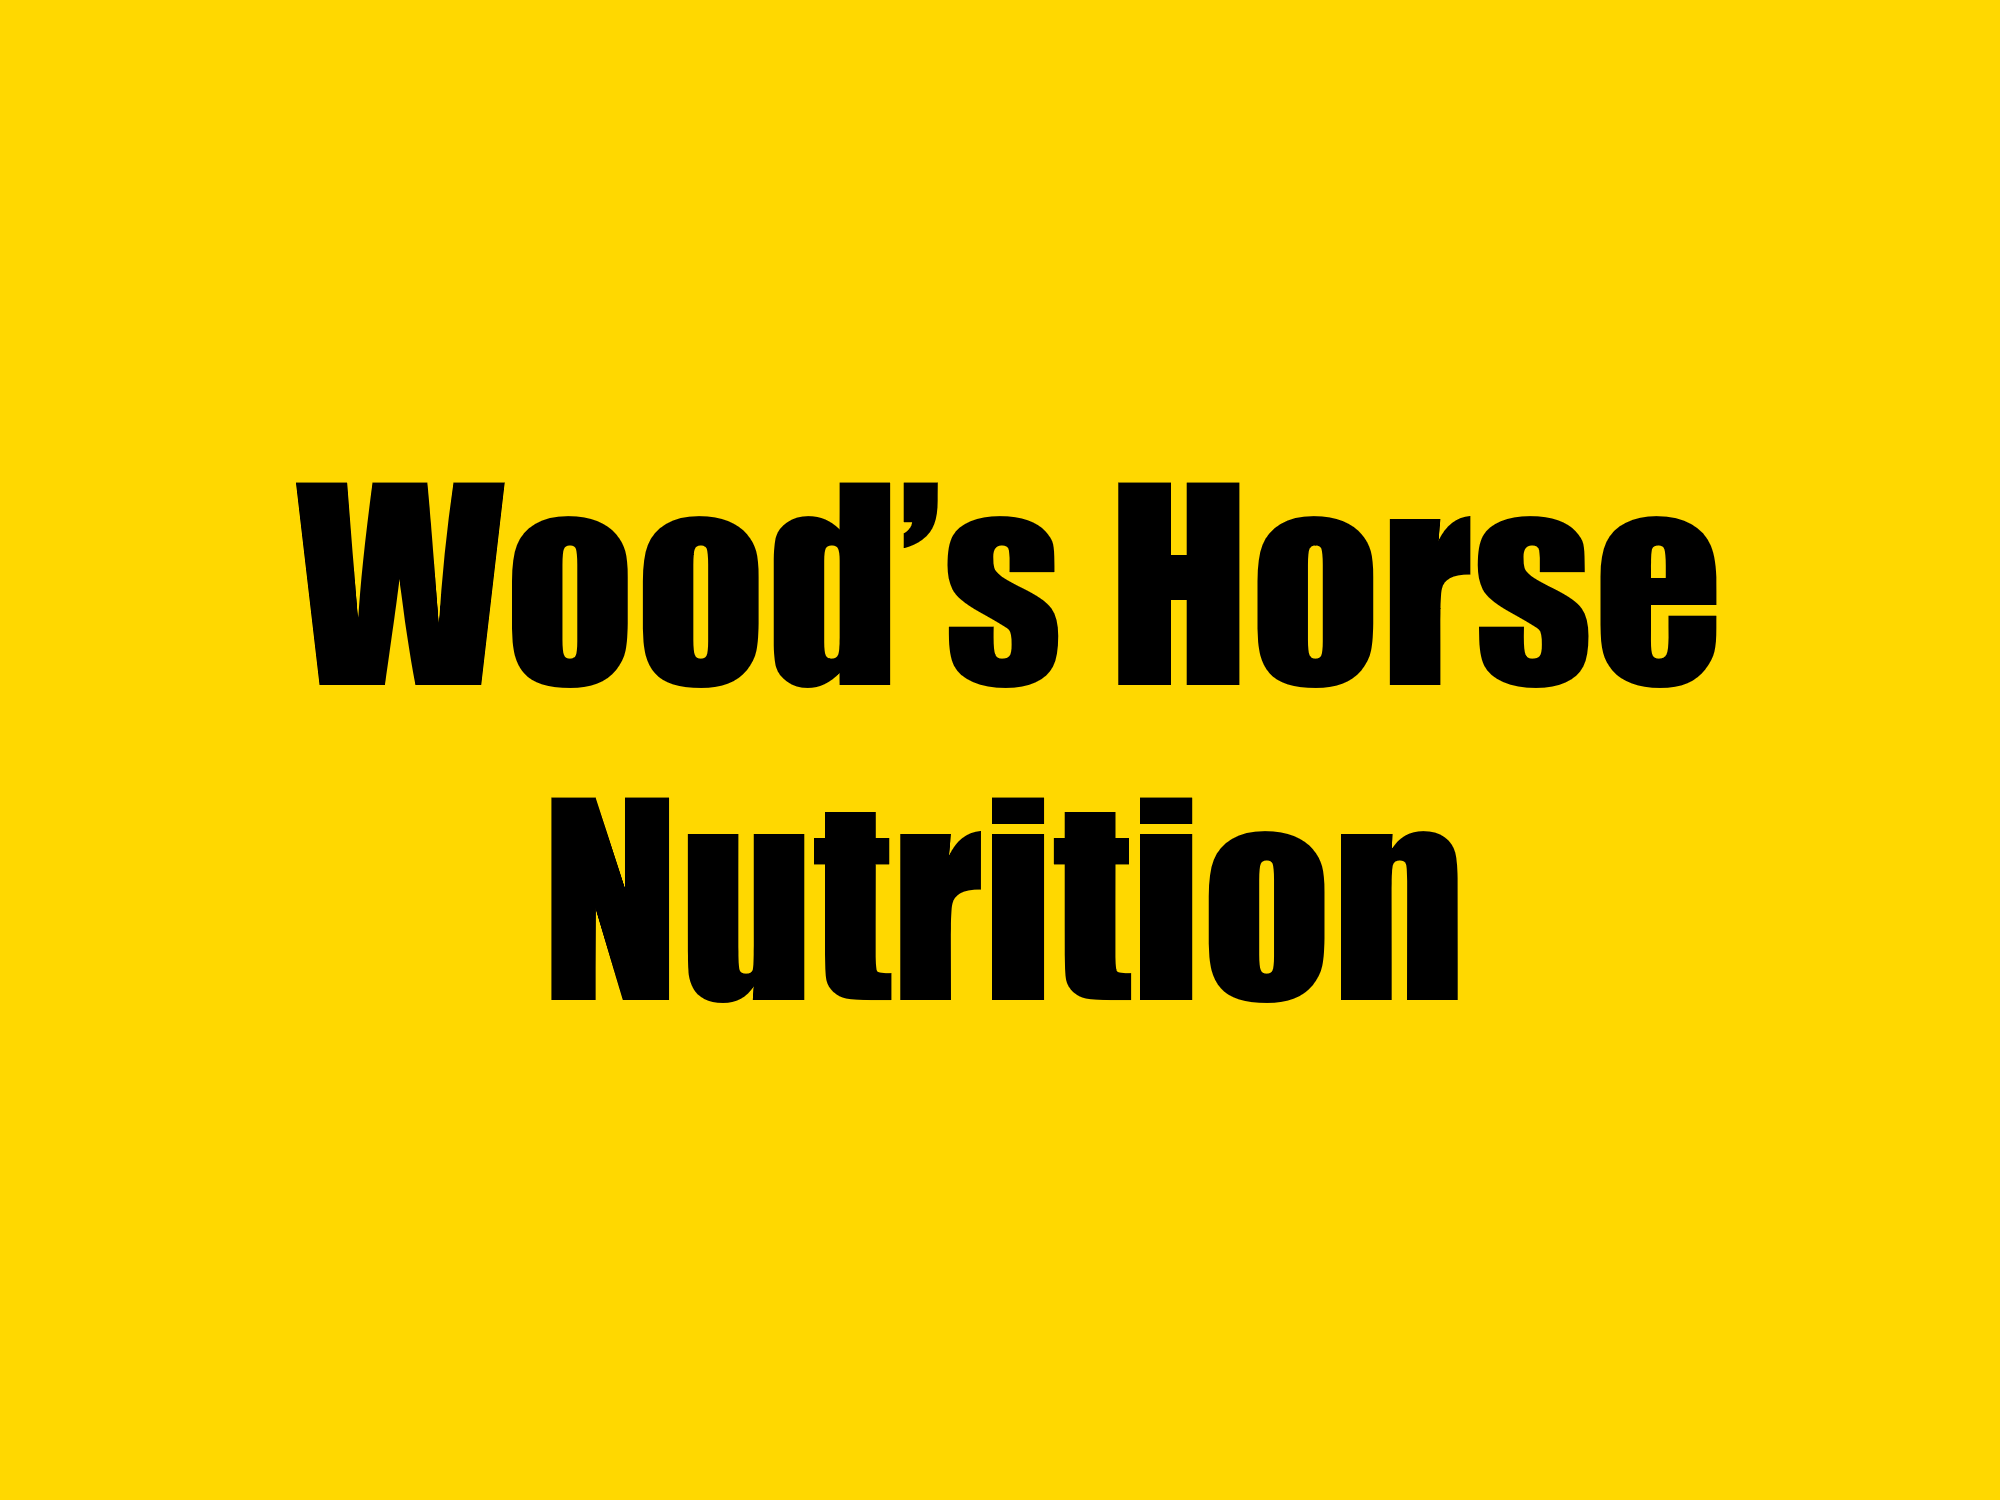 Wood's Horse Nutrition